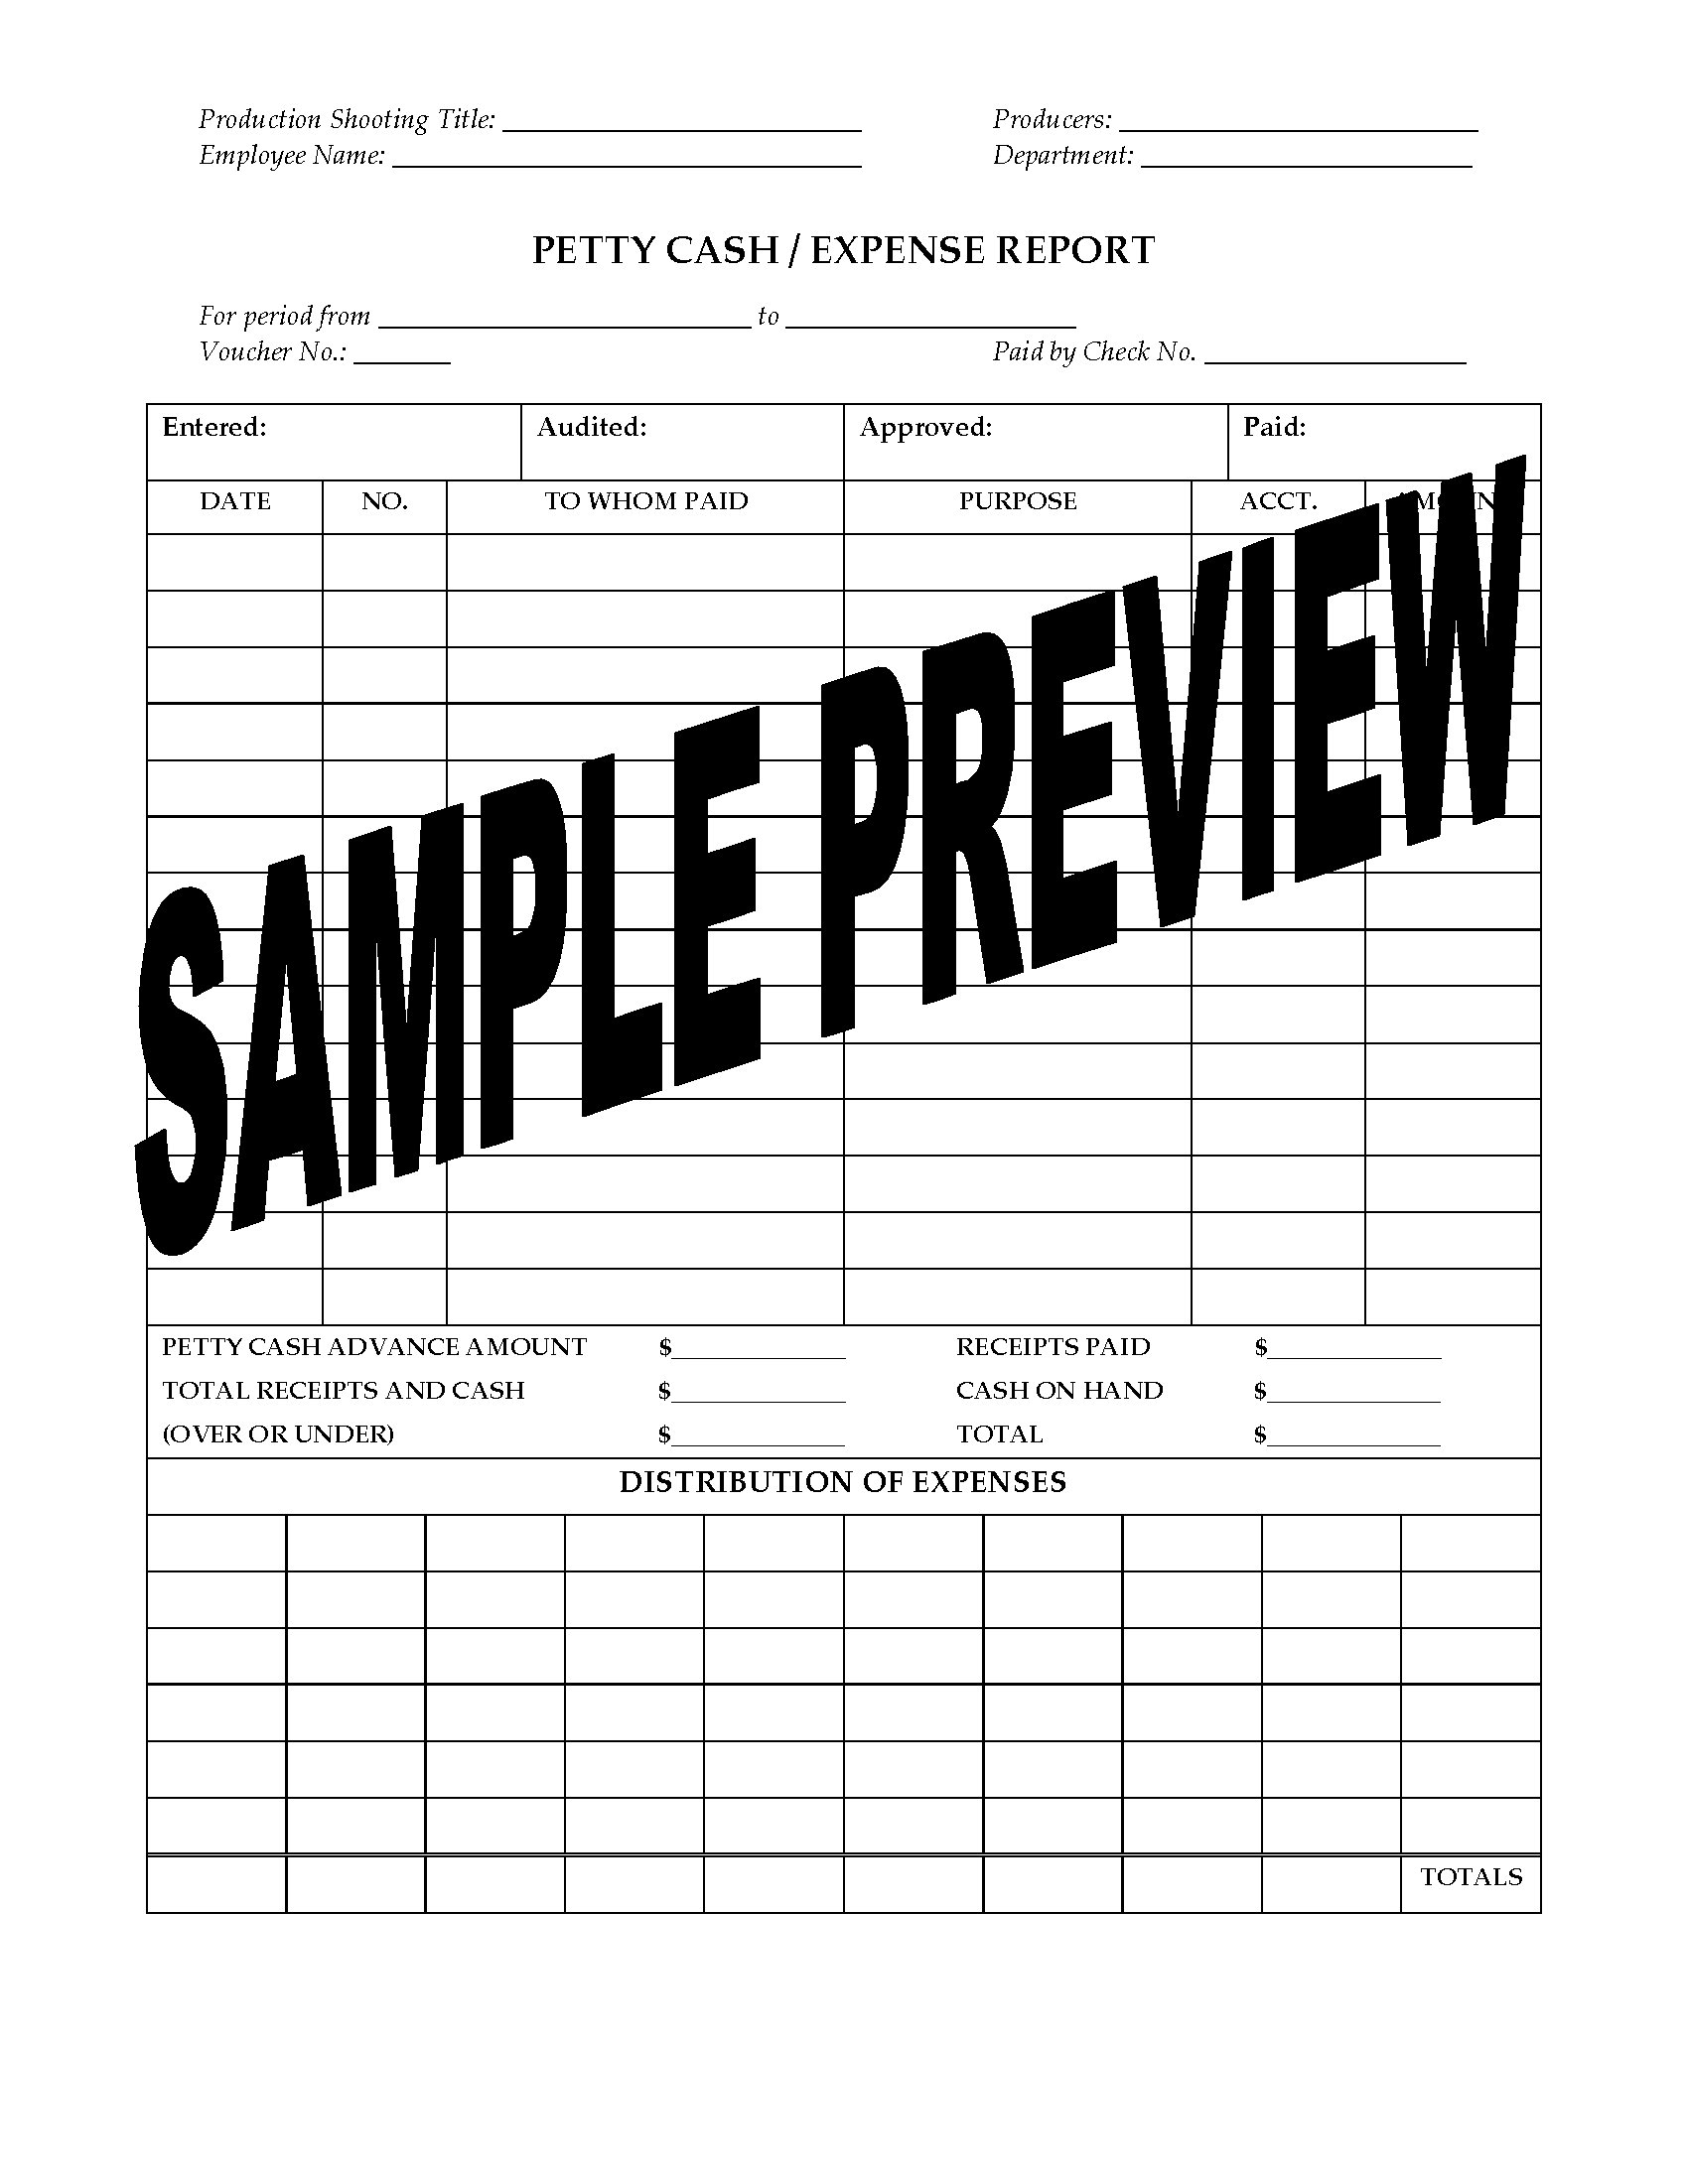 Petty Cash Expense Report For Film Or Tv Production Pertaining To Petty Cash Expense Report Template